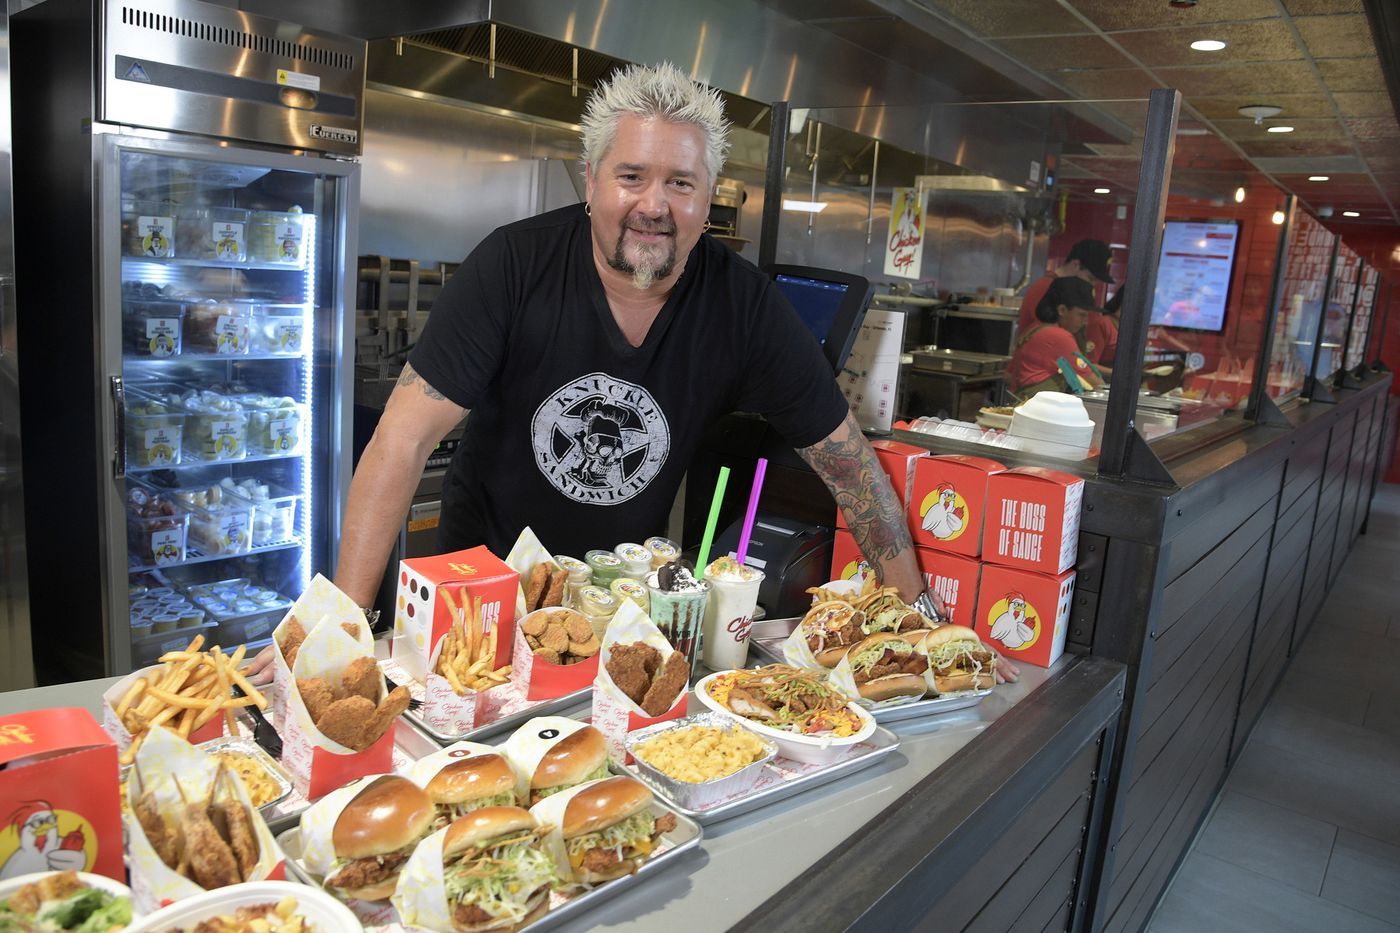 guy fieri standing behind chicken and fries in containers at chicken guy restaurant